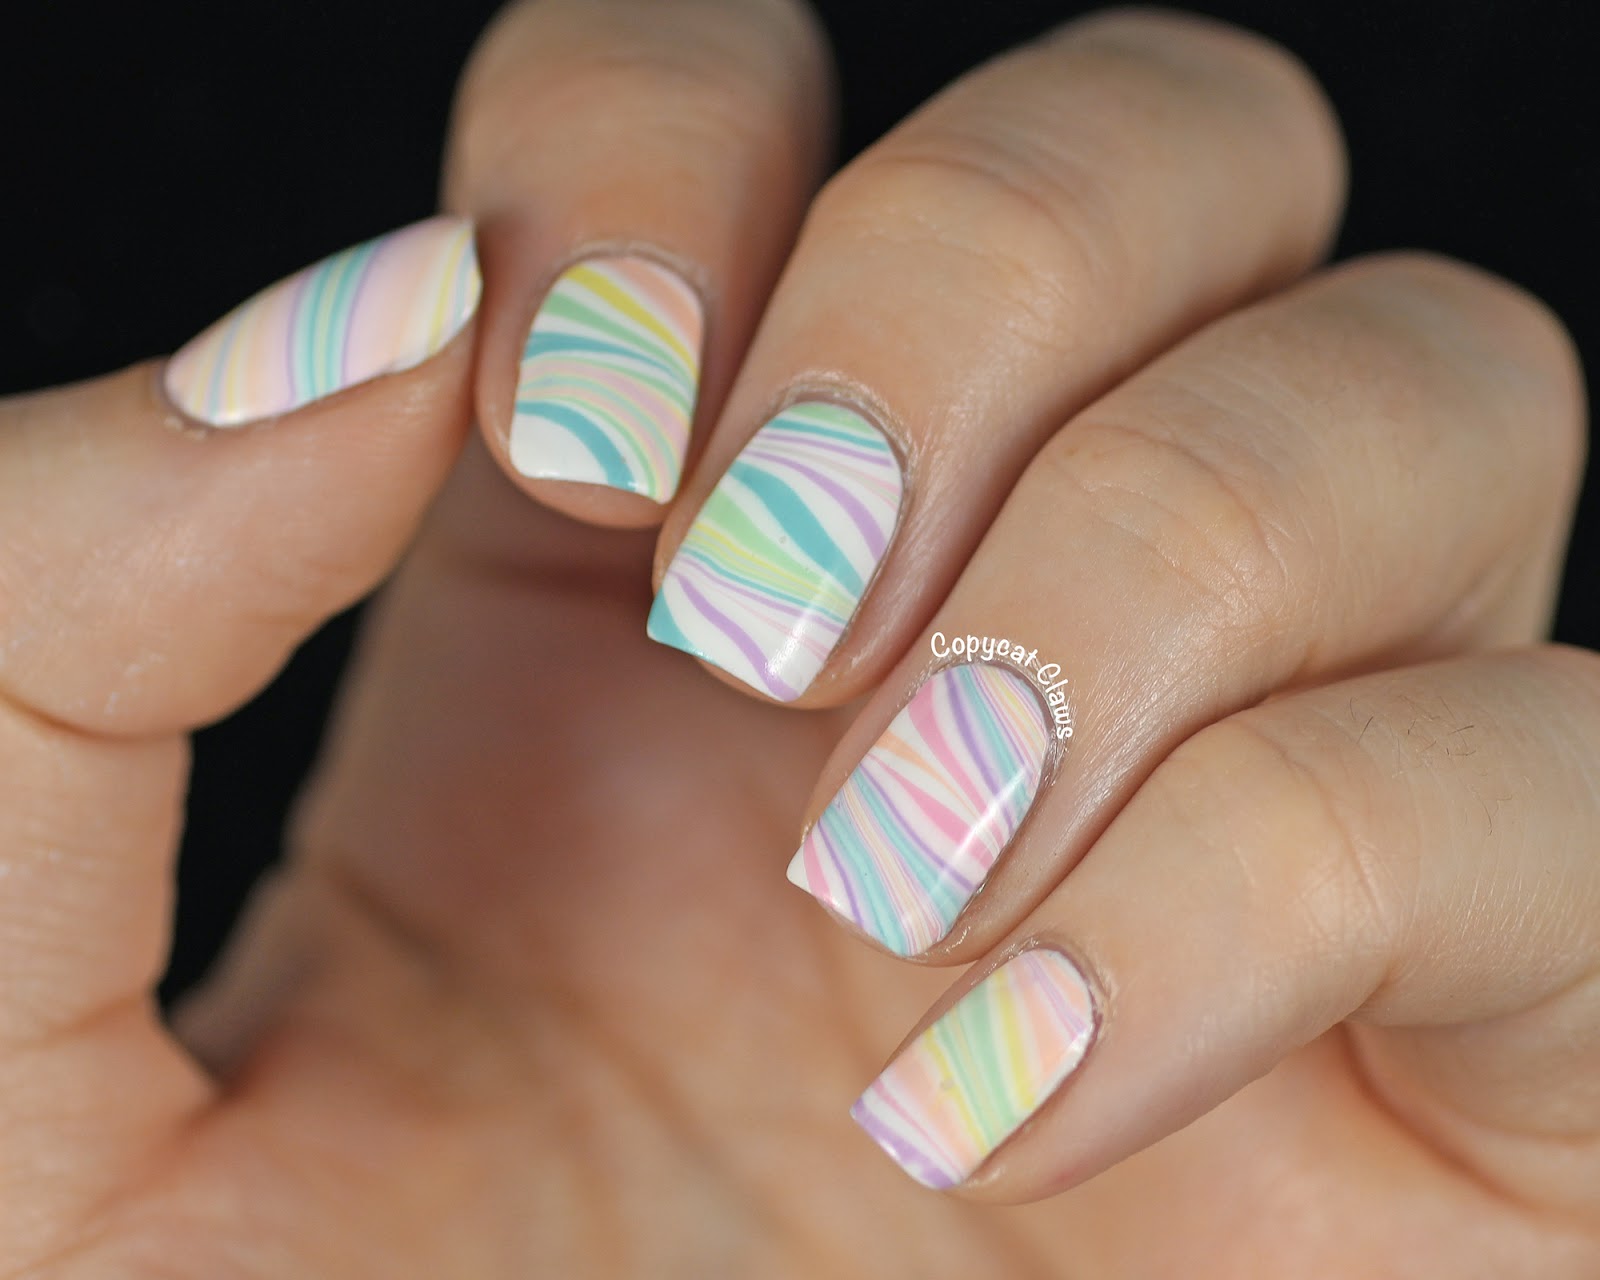 3. "How to Create a Water Marble Nail Art Design" - wide 5